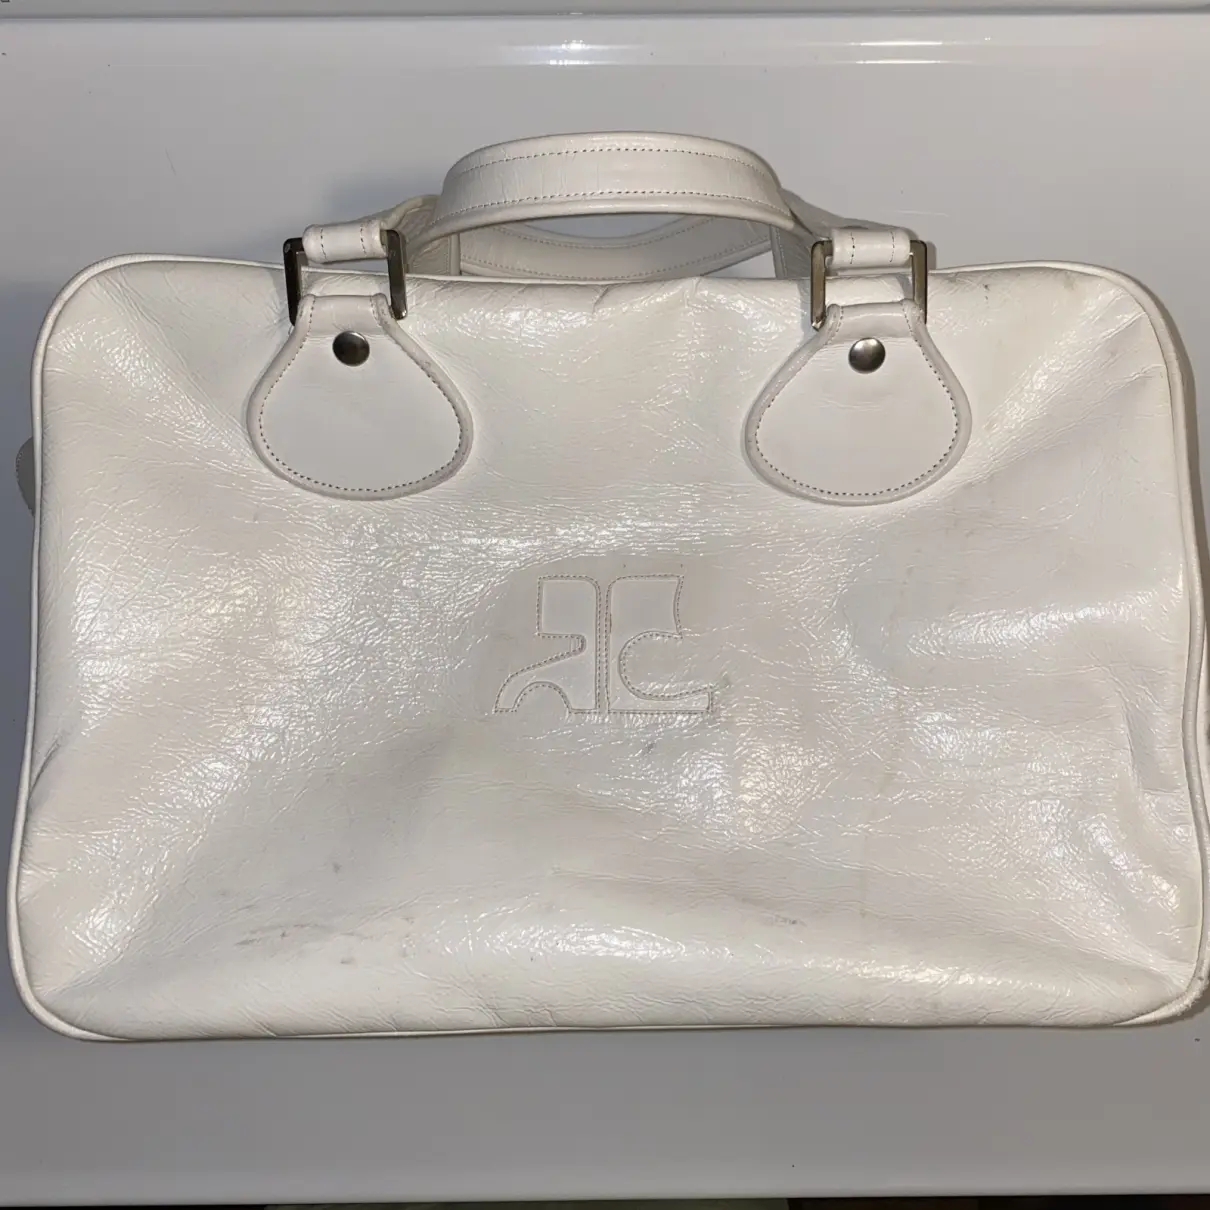 Courrèges Patent leather tote for sale